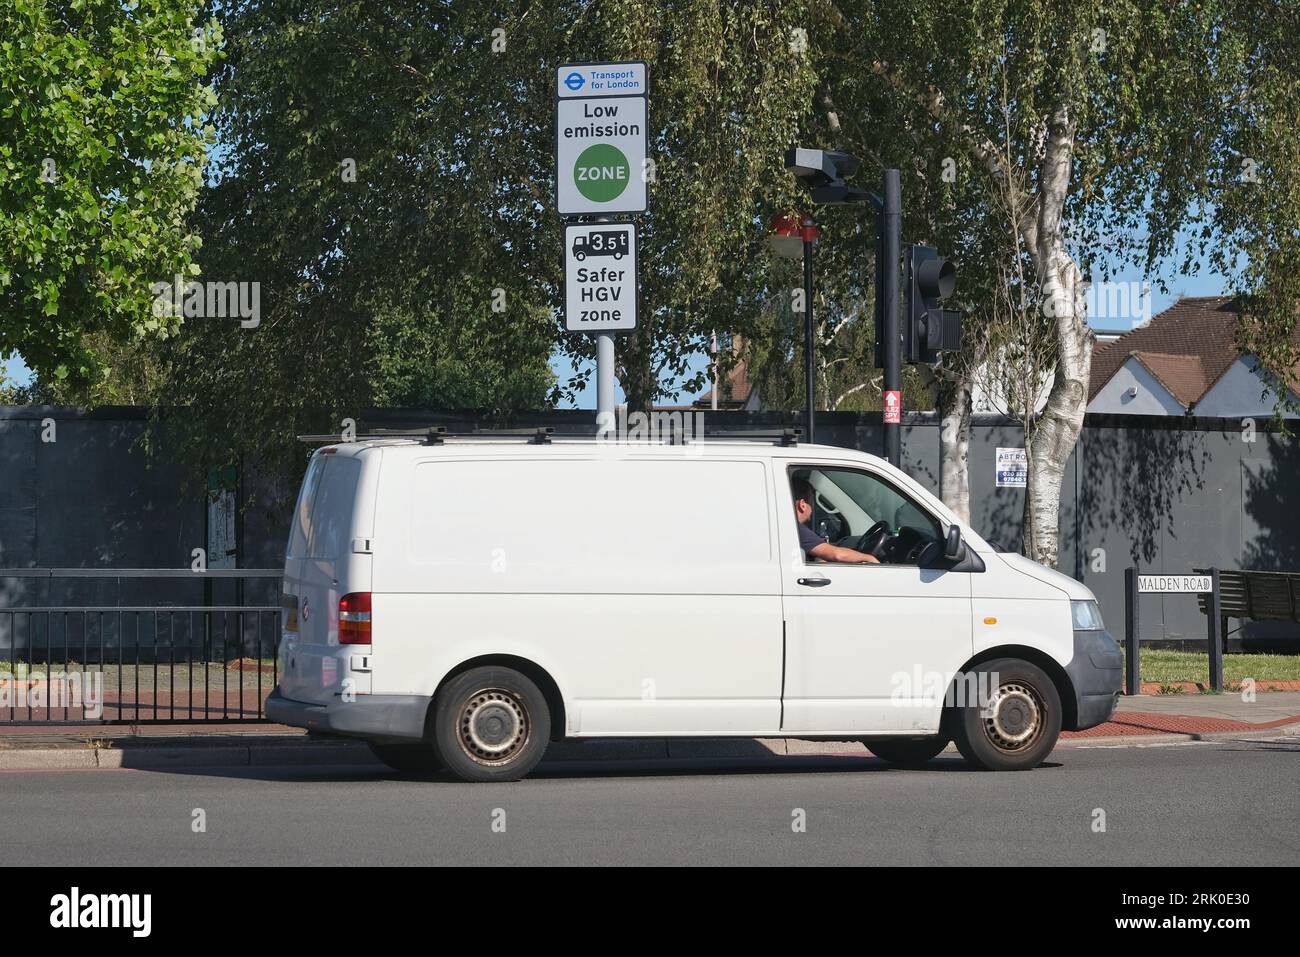 London, UK. A tradesperson's van passes a Low Emission Zone (LEZ) road sign in south-west London. Stock Photo